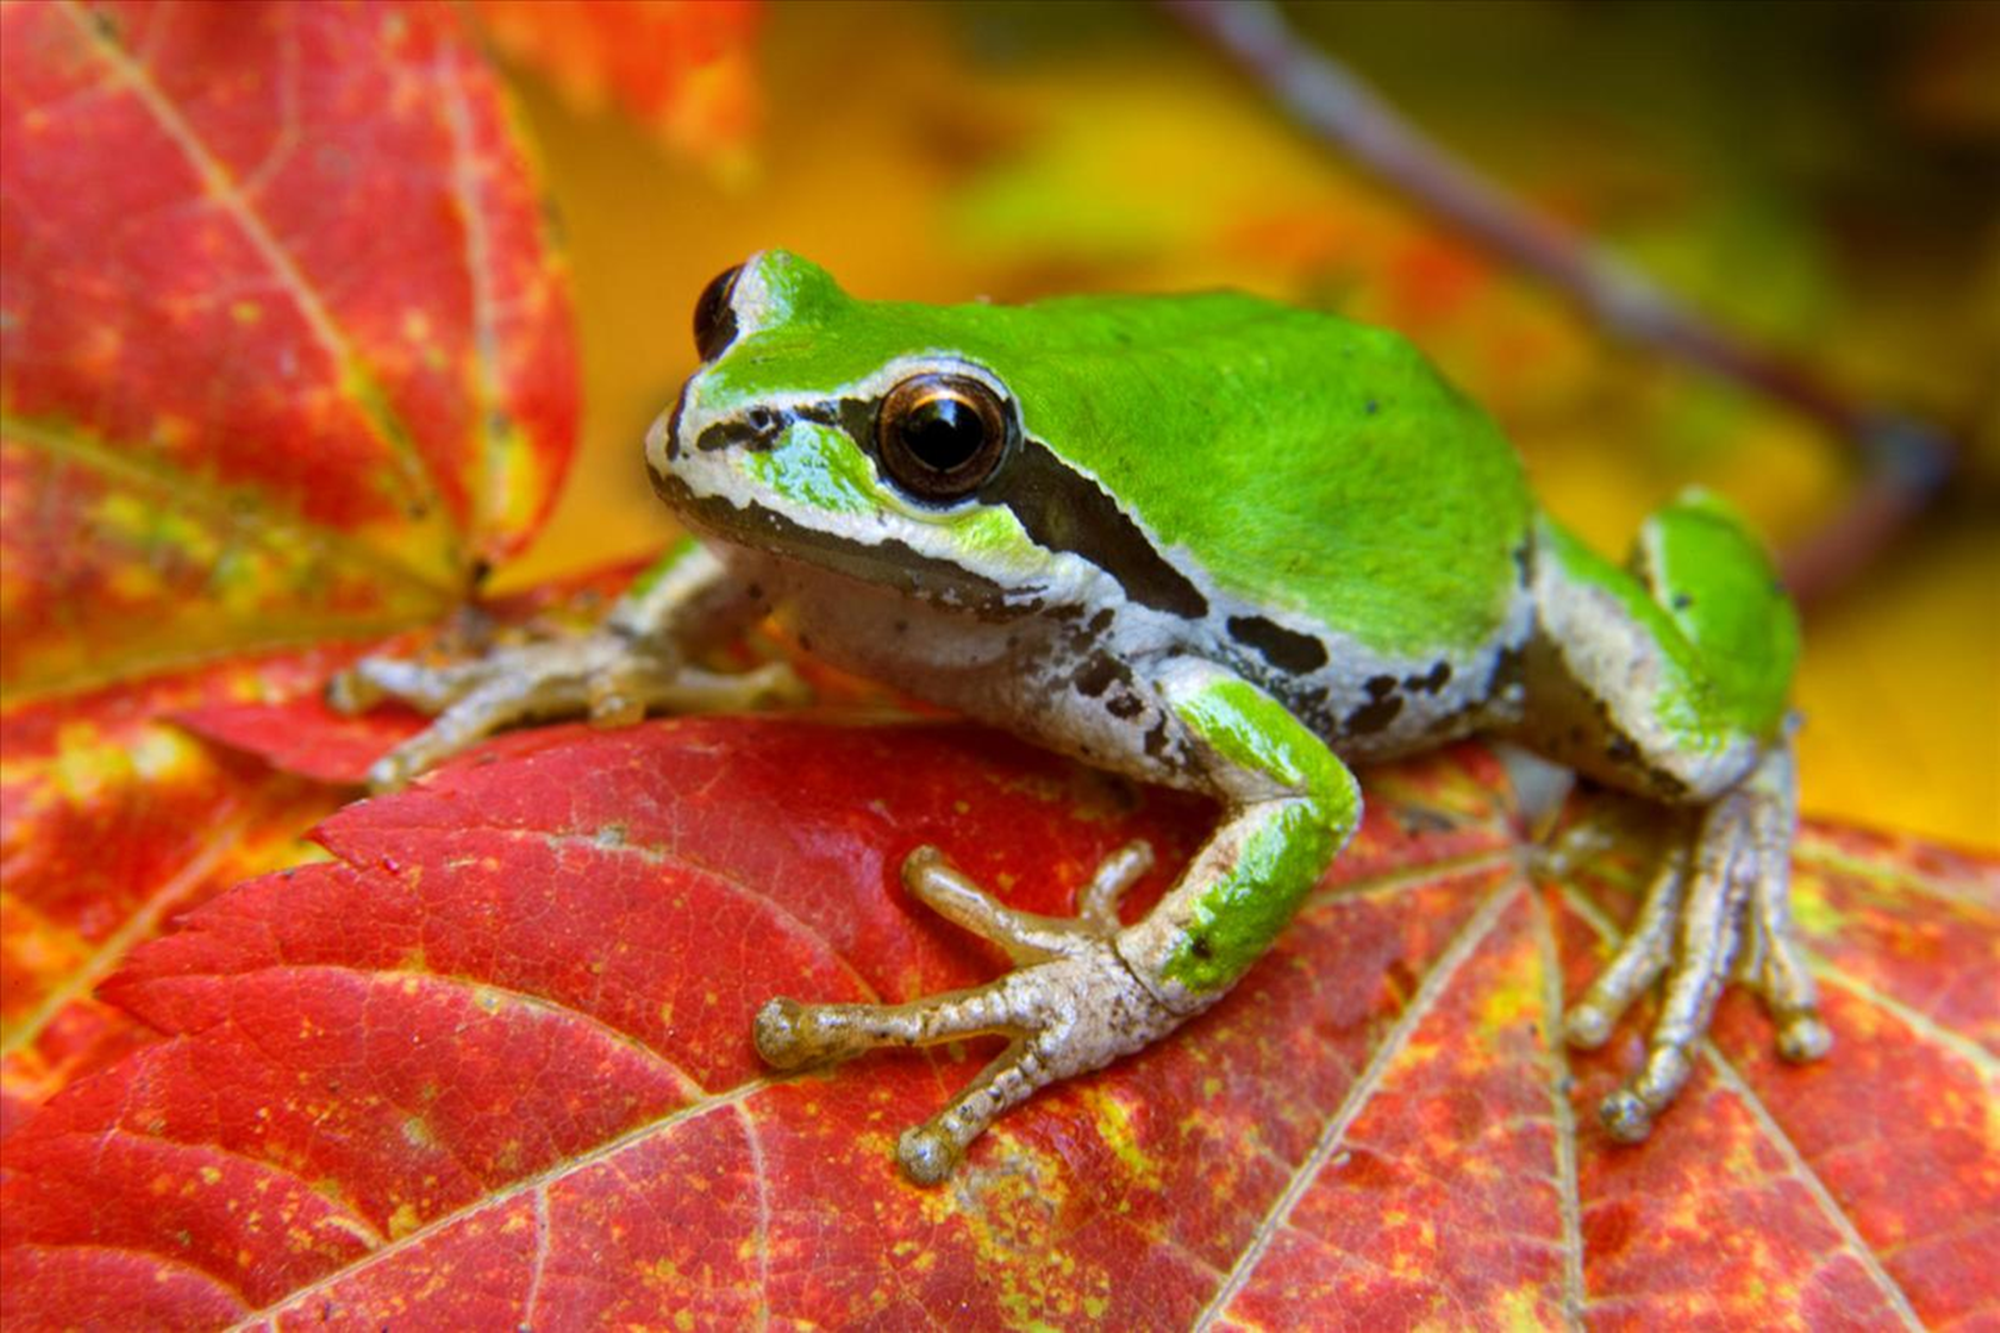   Tapety PC HD nowe - Tree Frog on a Vine Maple Leaf, Olympic National Park, Washington.bmp